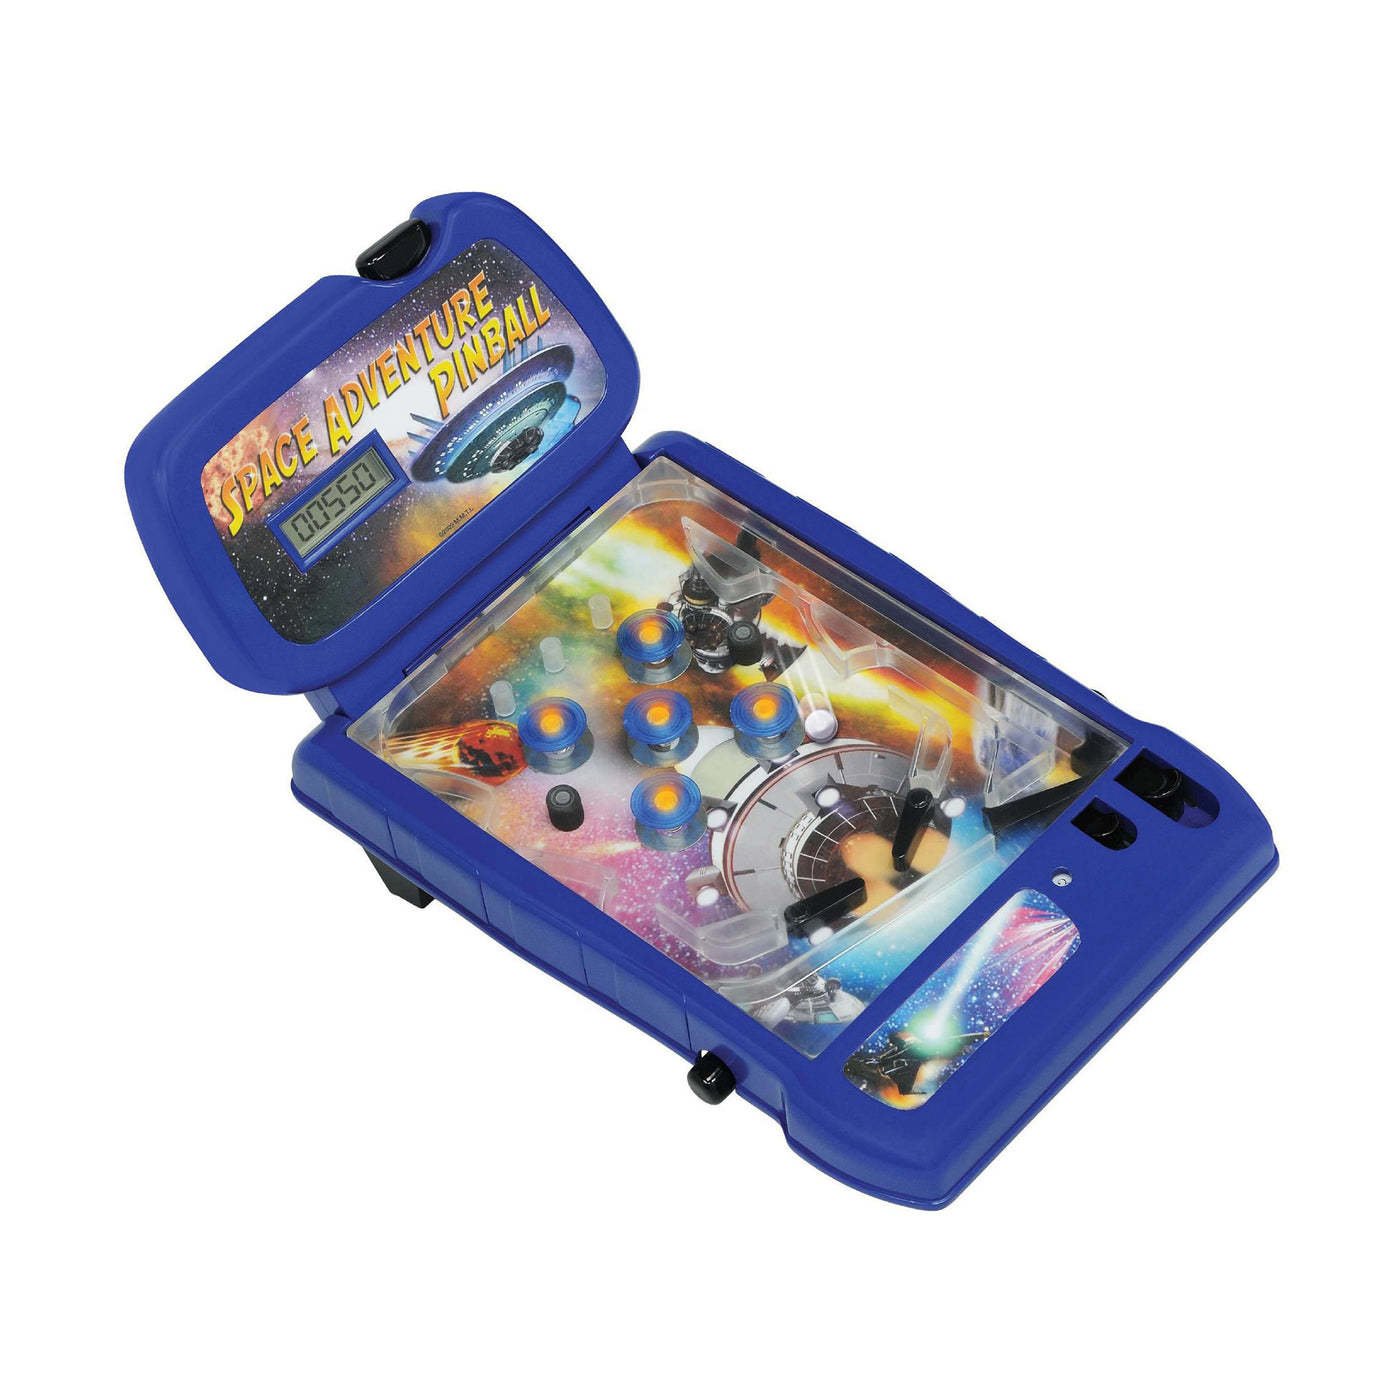 Arcade Alley® Electronic Space Adventure Pinball Tabletop Game